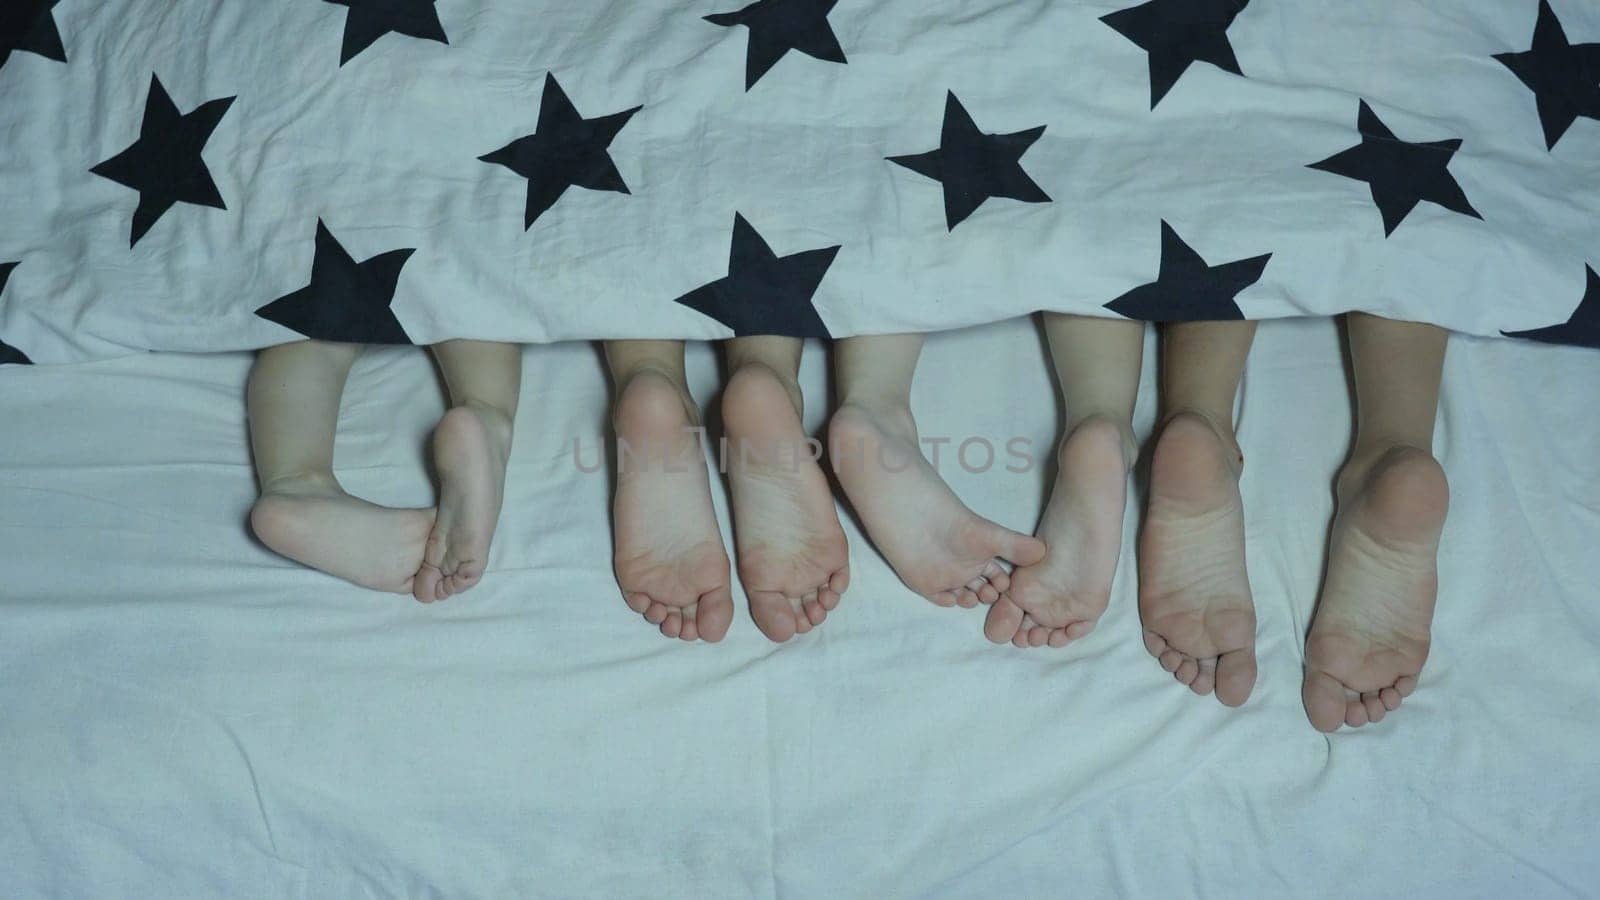 Legs of babies in the bed from under the covers before going to bed. by DovidPro